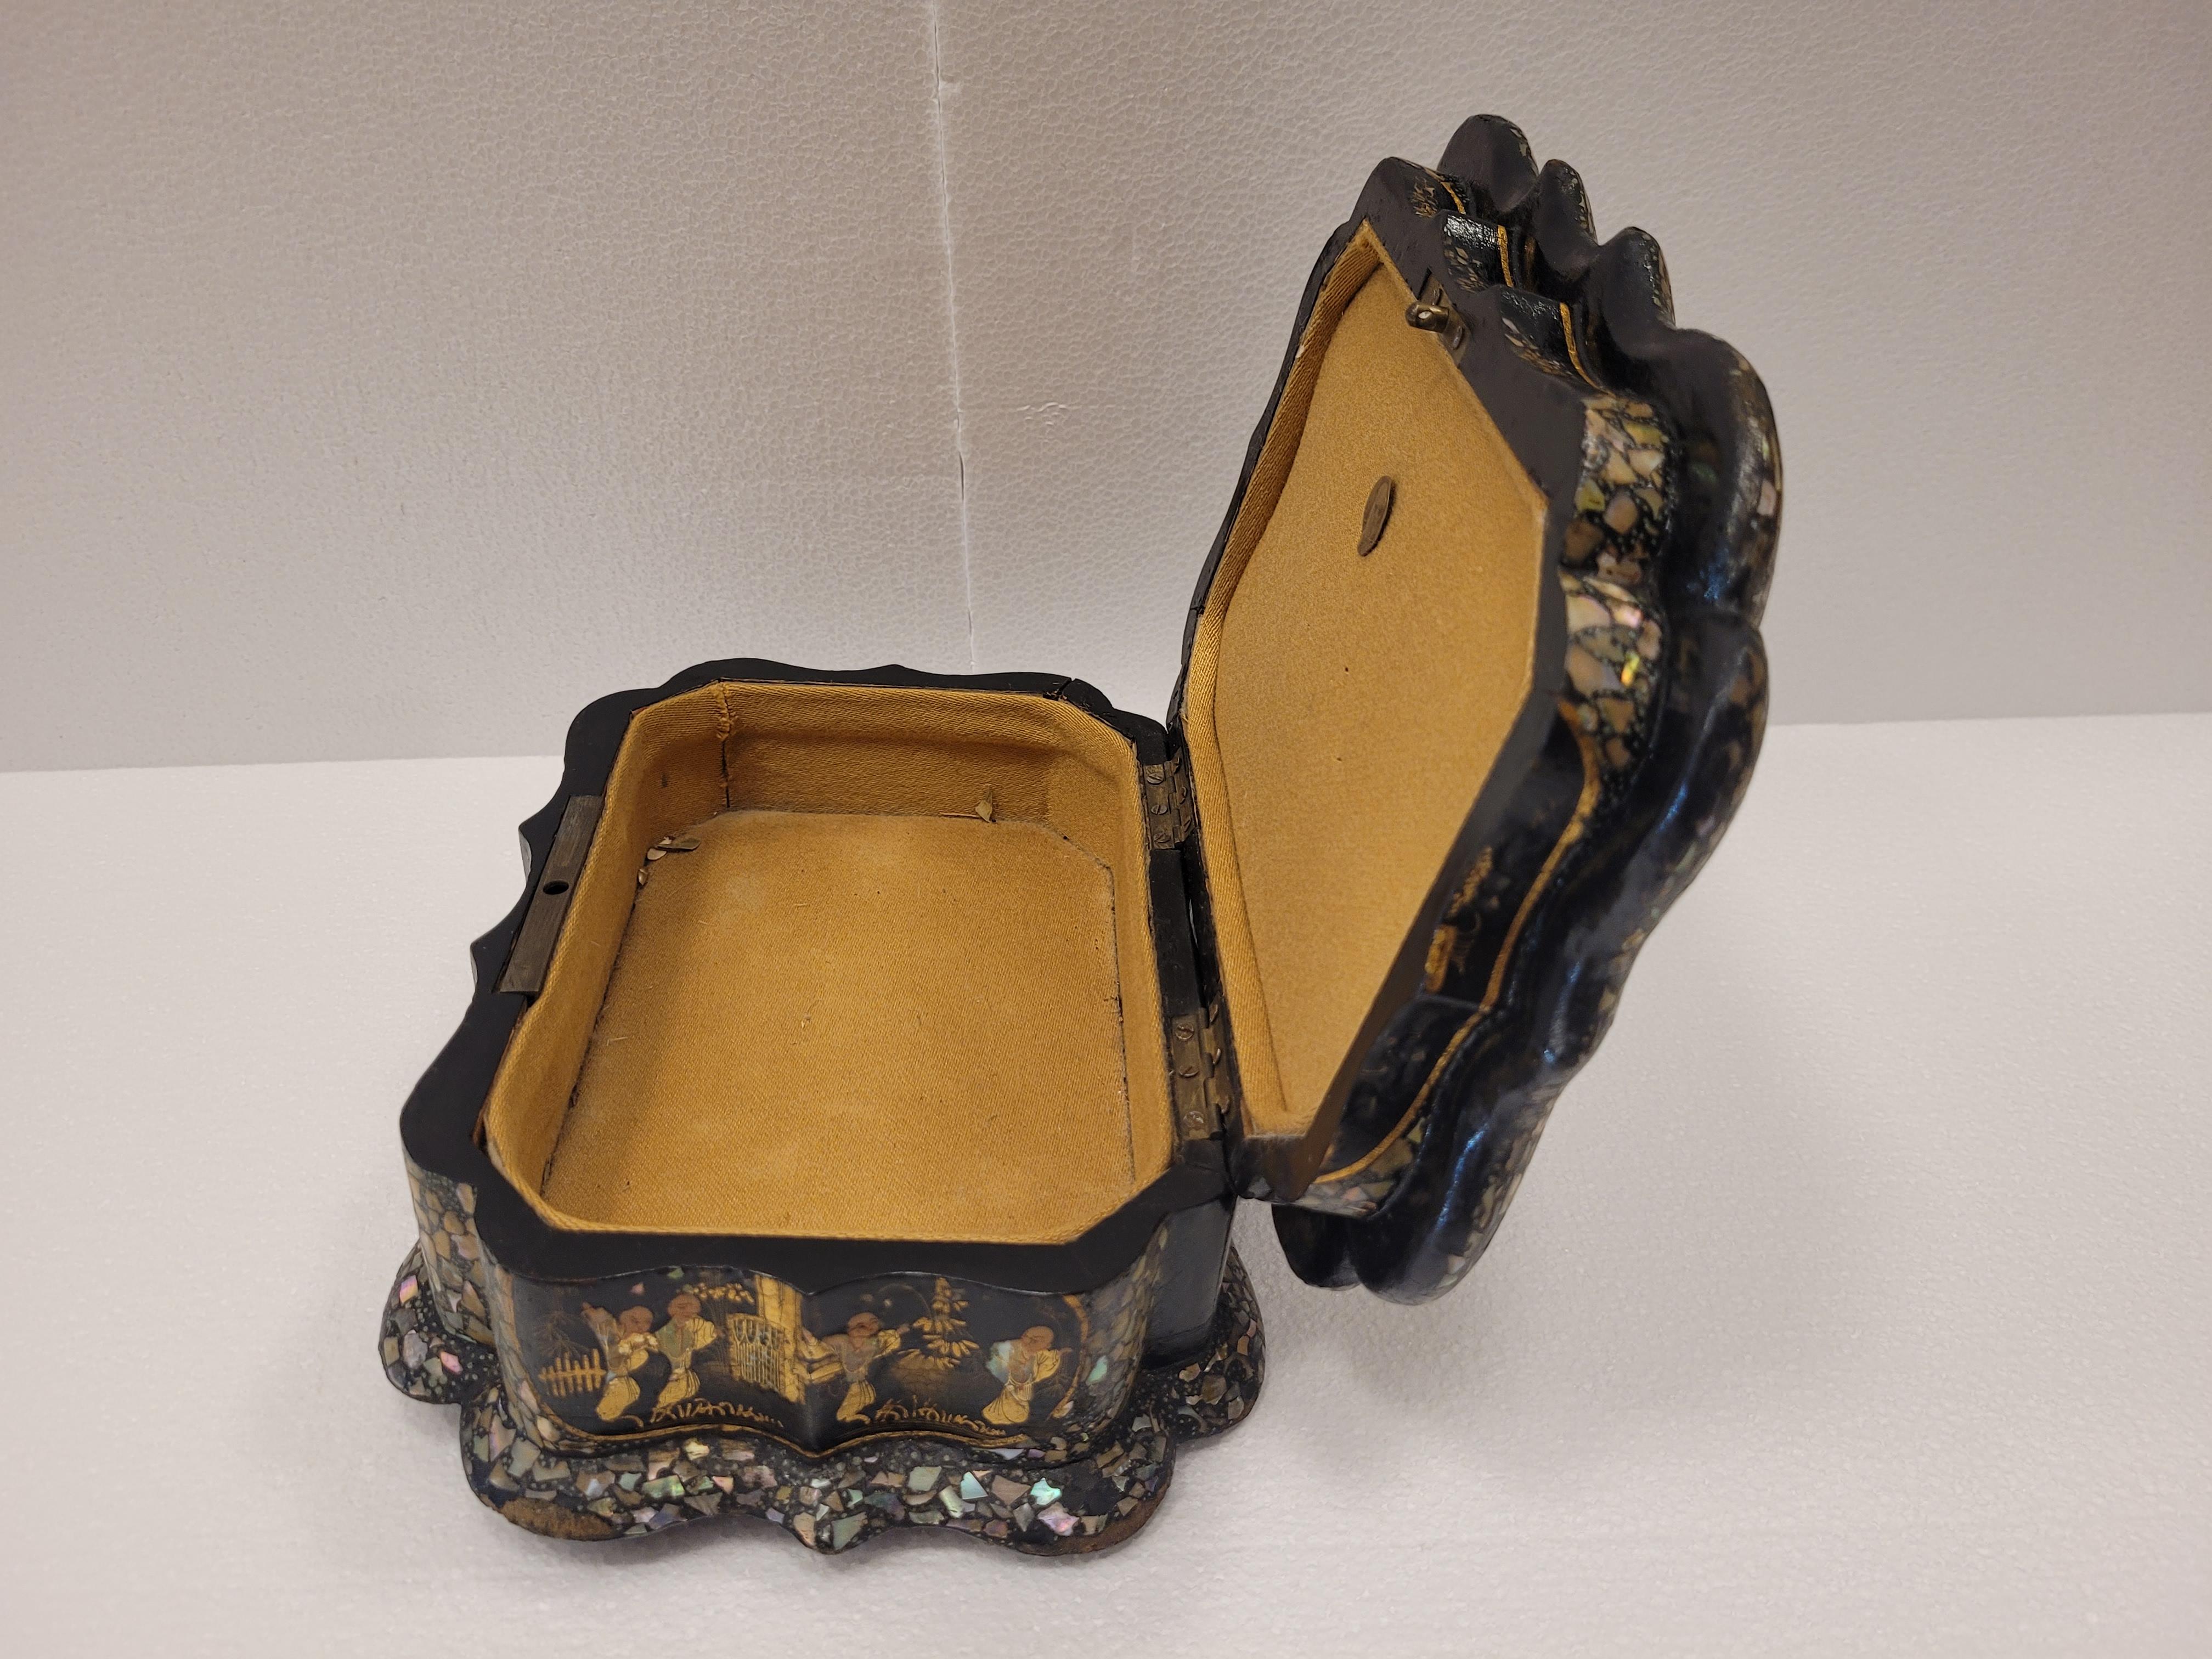  Chinese black gold Jewelry Box, yellow silk For Sale 9